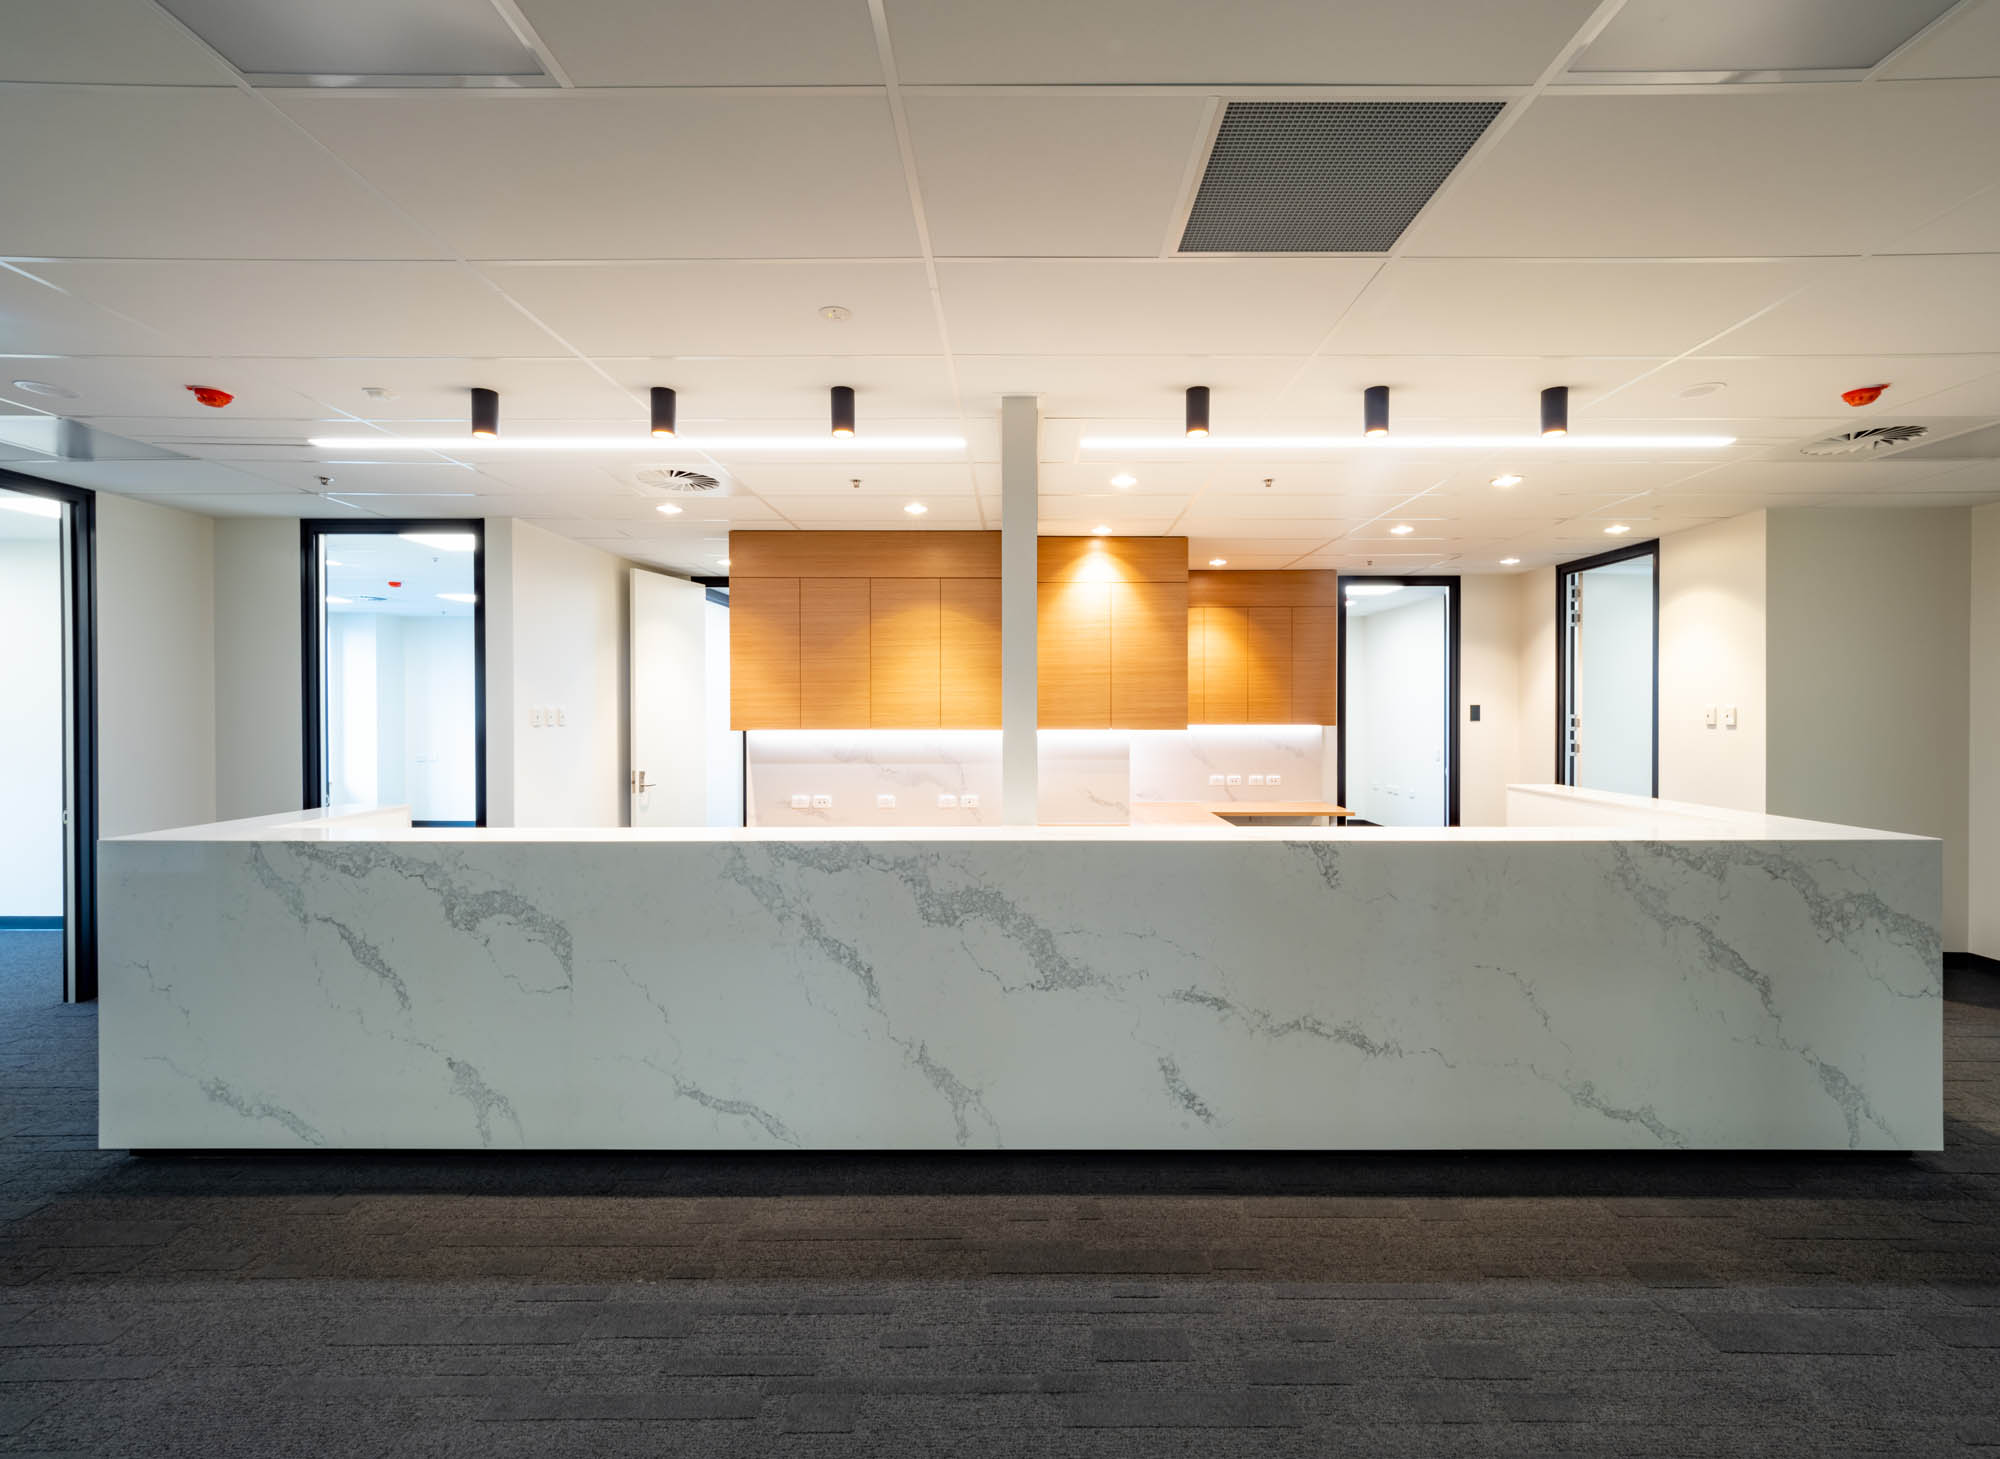 calvary adelaide hospital healthcare aged care fitout construction medical reception desk admission